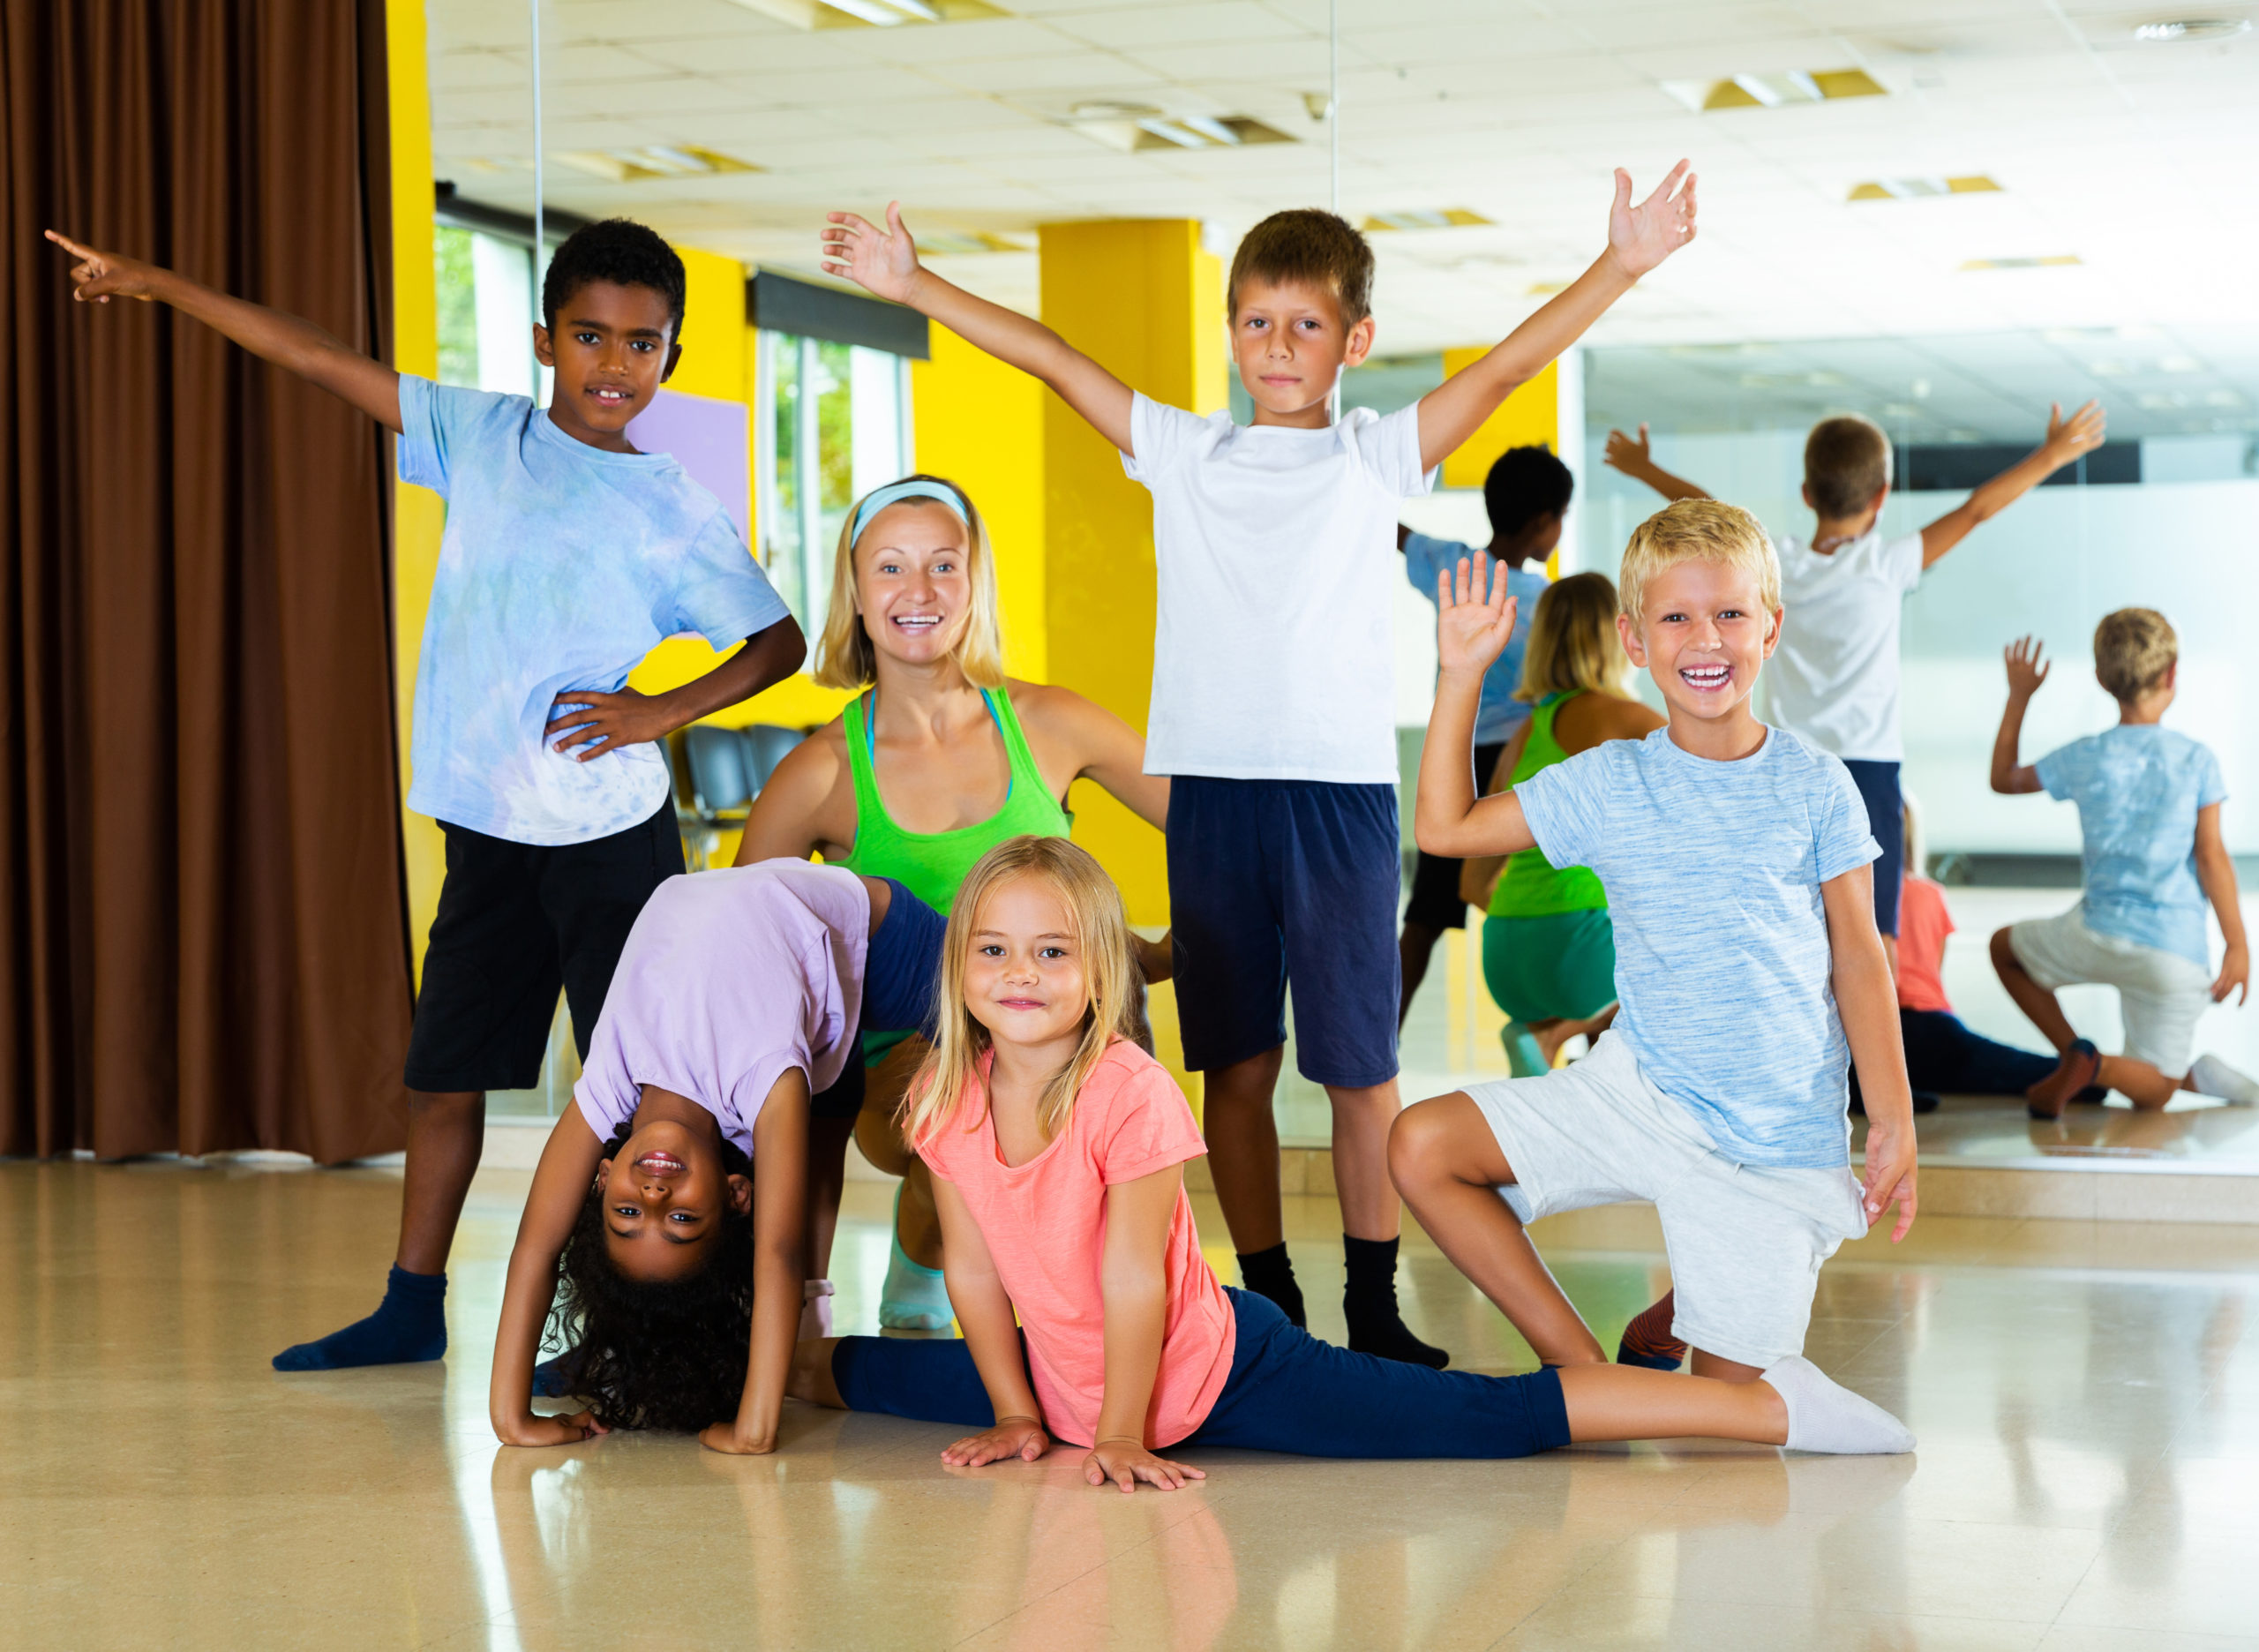 Group portrait of happy dance students with dance teacher in center in a studio.